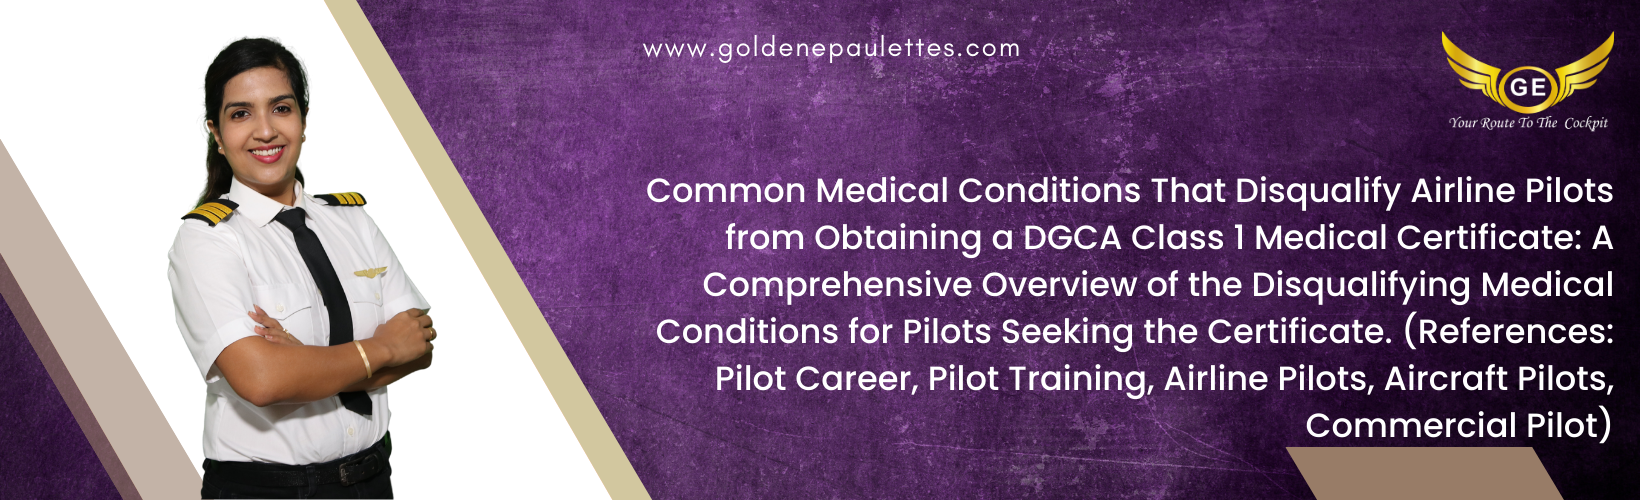 Common Medical Conditions That May Disqualify Airline Pilots From Obtaining a DGCA Class 1 Medical Certificate